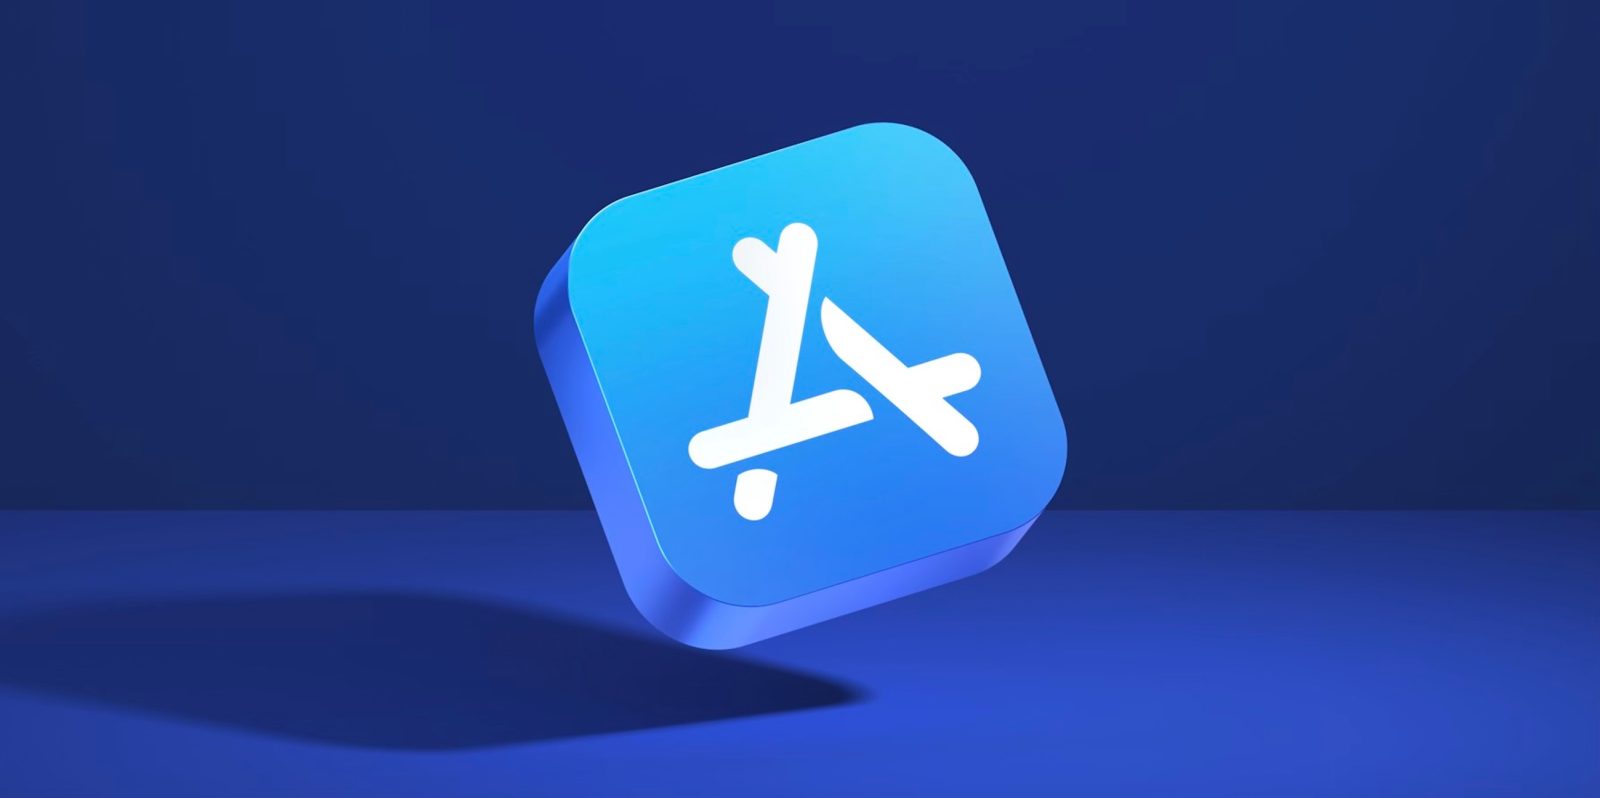 Developer tells how he became ineligible for the reduced App Store fees  after a mistake [U] - 9to5Mac